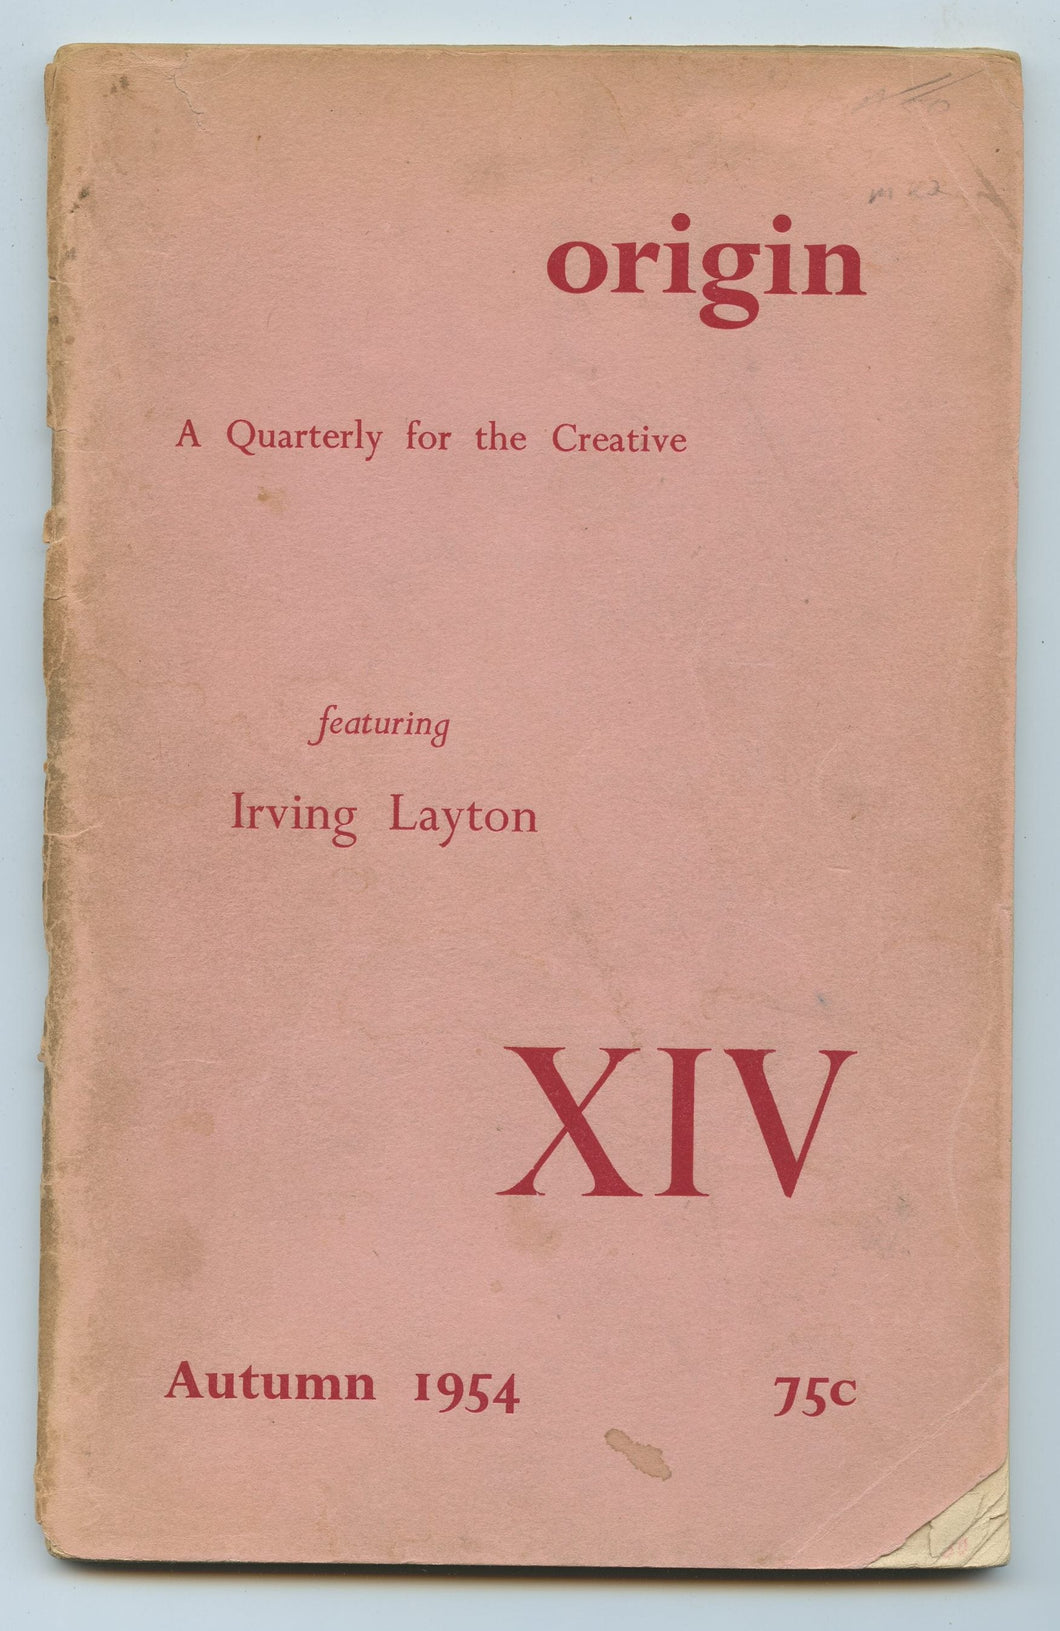 Origin: A Quarterly for the Creative, featuring Irving Layton, Autumn 1954